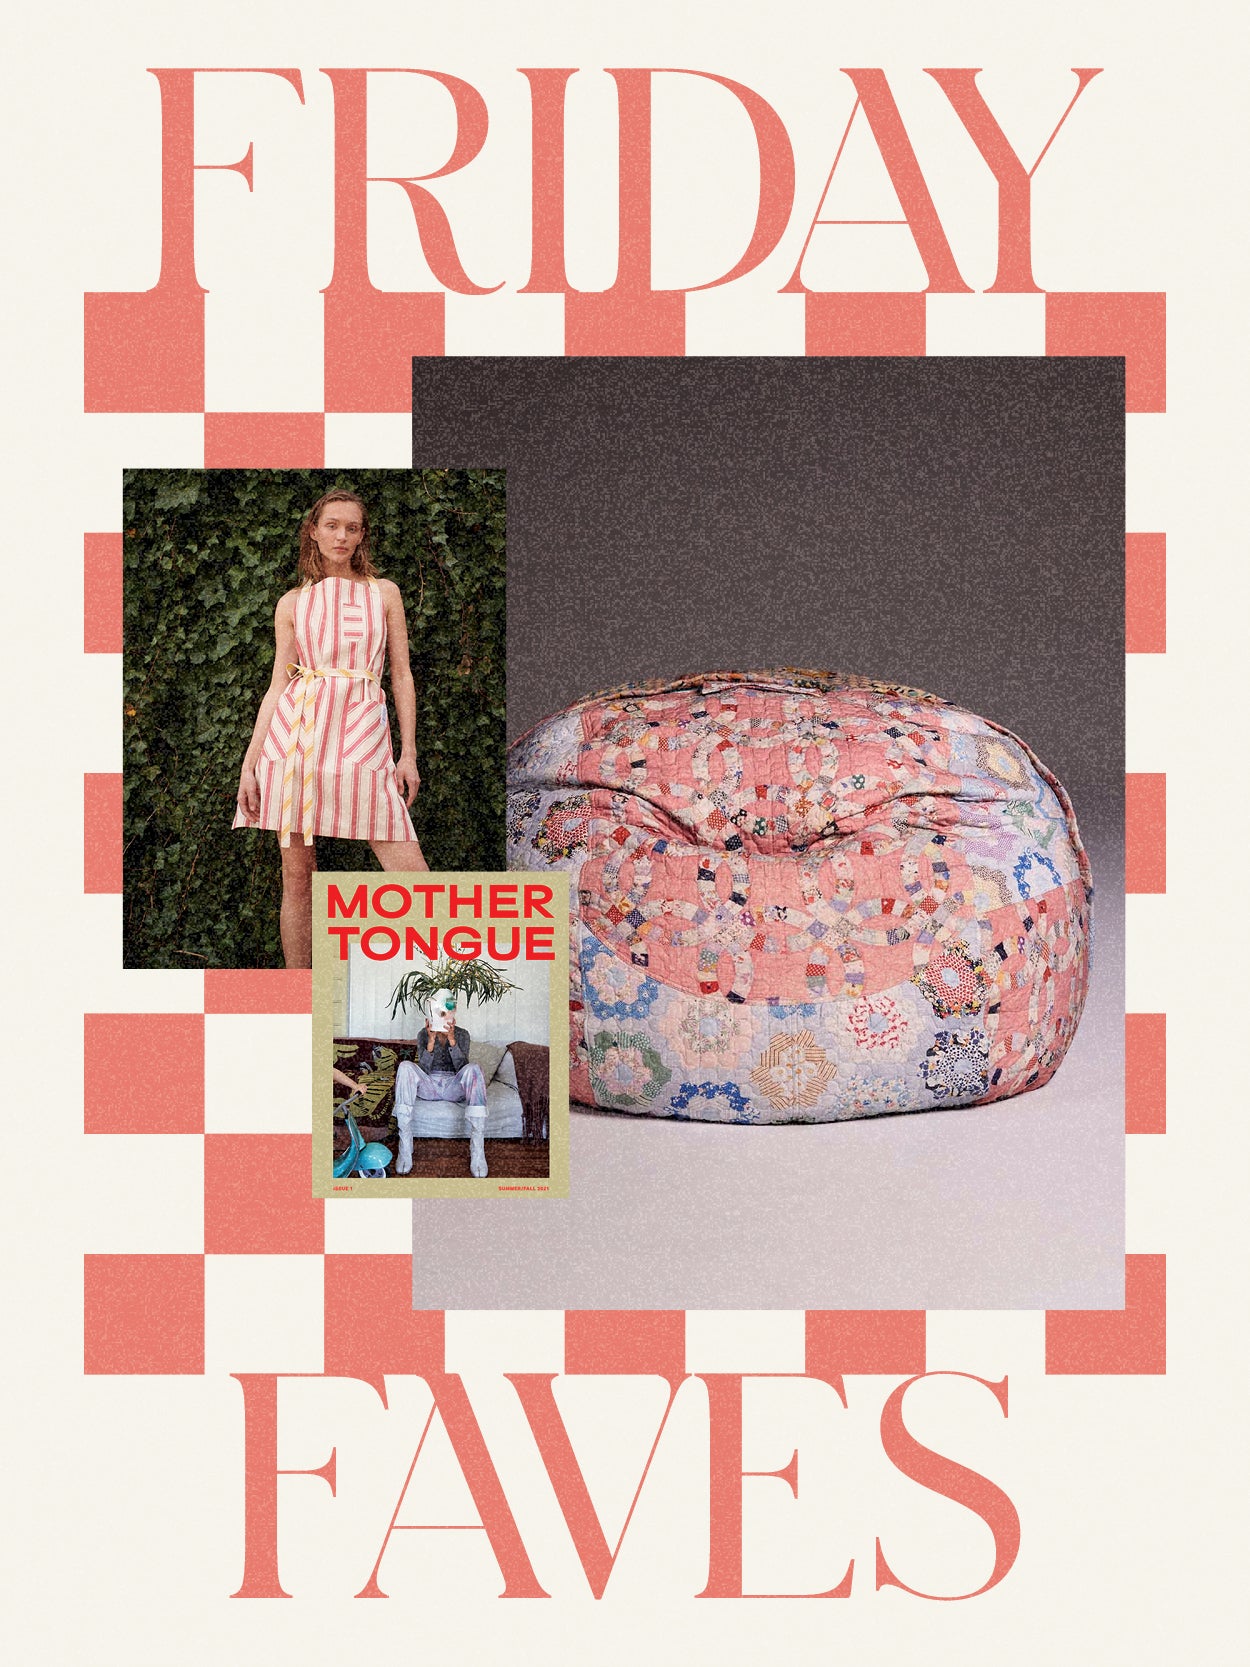 floral bean bag, magazine and model with a striped apron